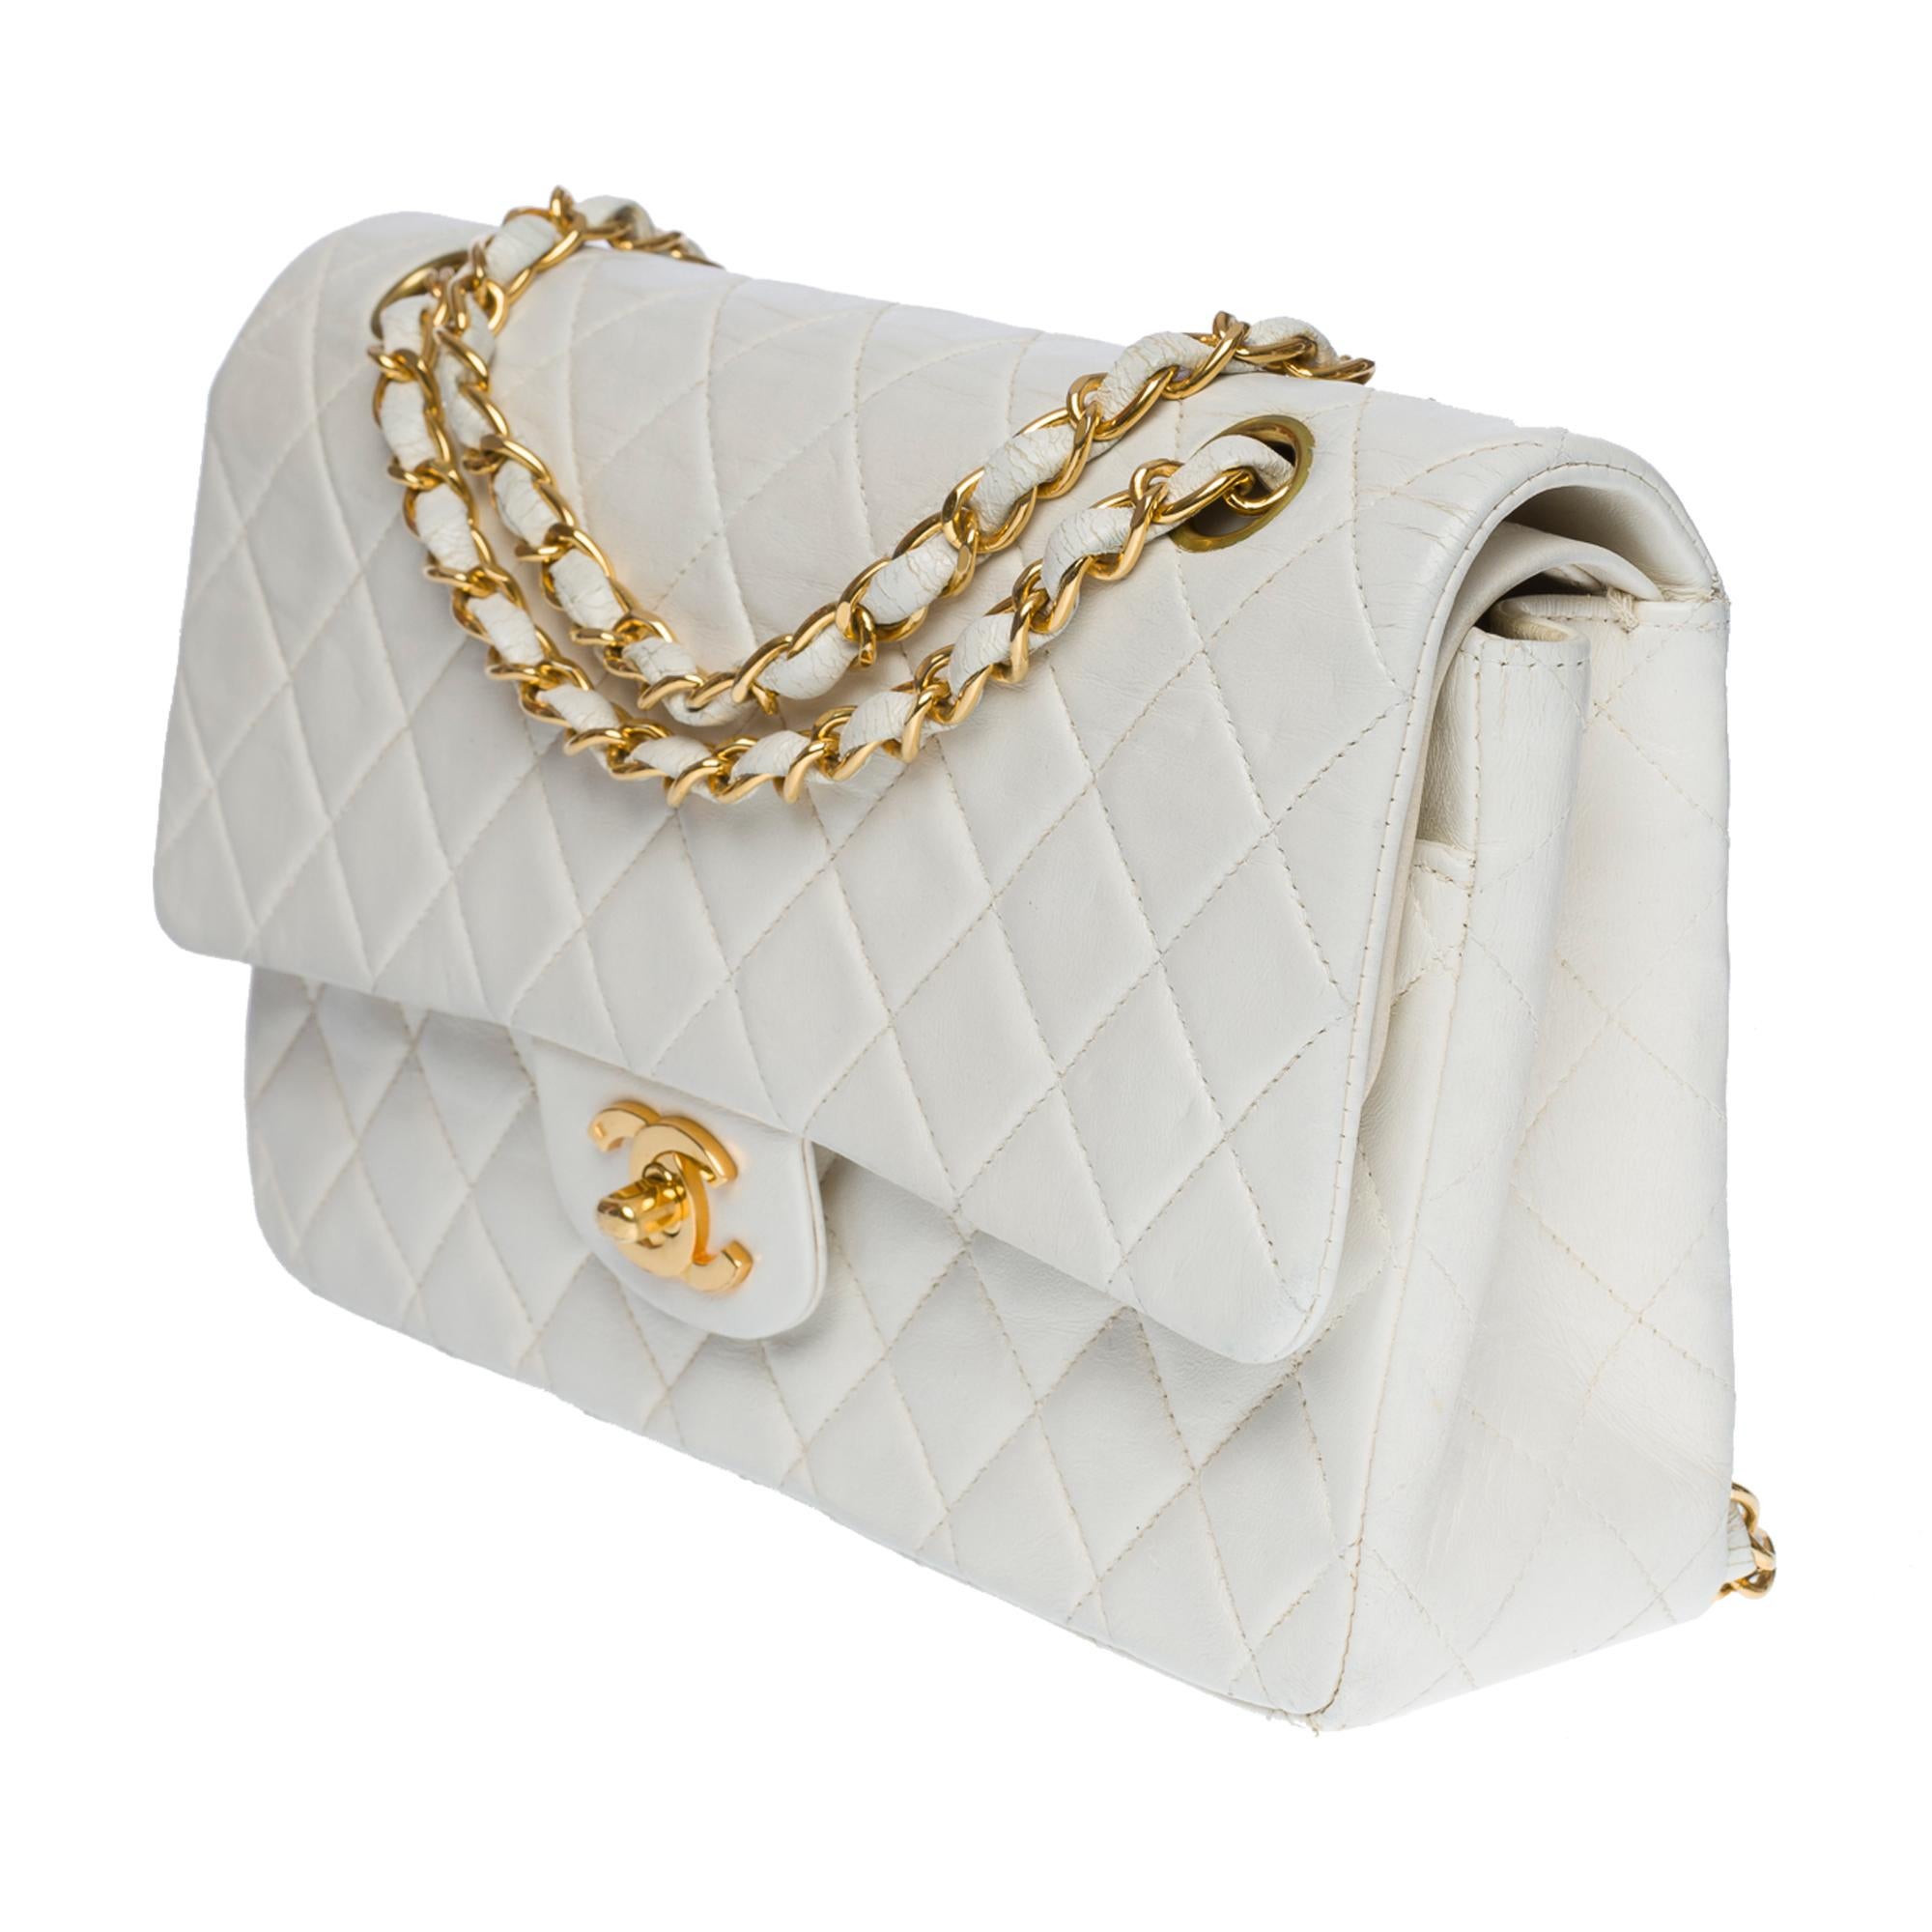 Women's Chanel Timeless 23cm double flap Shoulder bag in White quilted lambskin, GHW